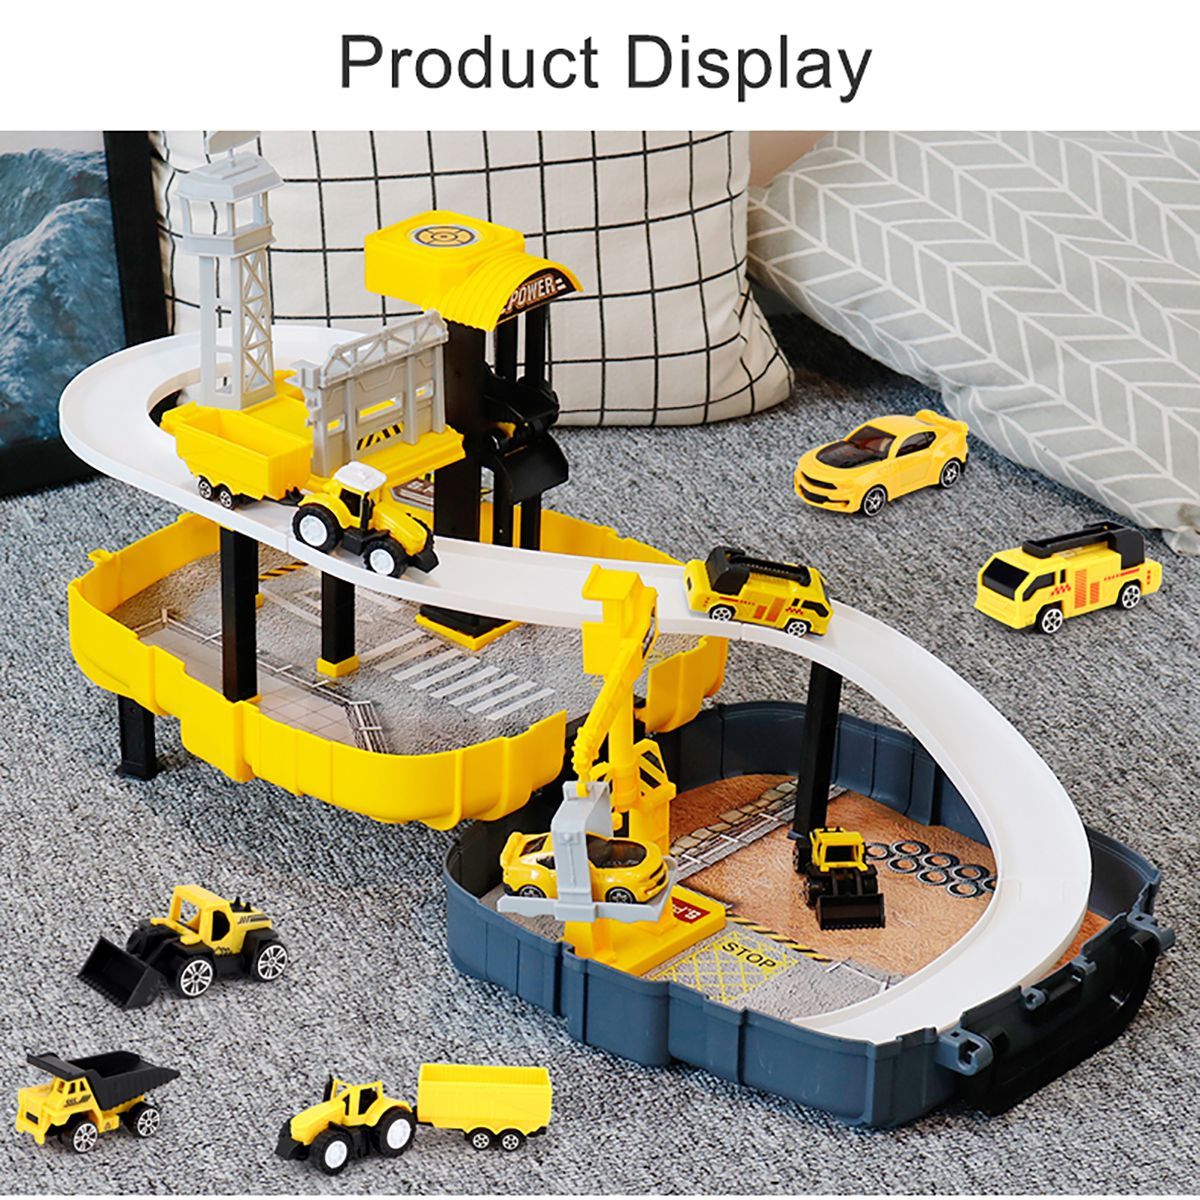 Construction-Toys-Sets-Childrens-Construction-Engineering-Set-Collection-Model-Vehicles-Metal-Tracto-1599958